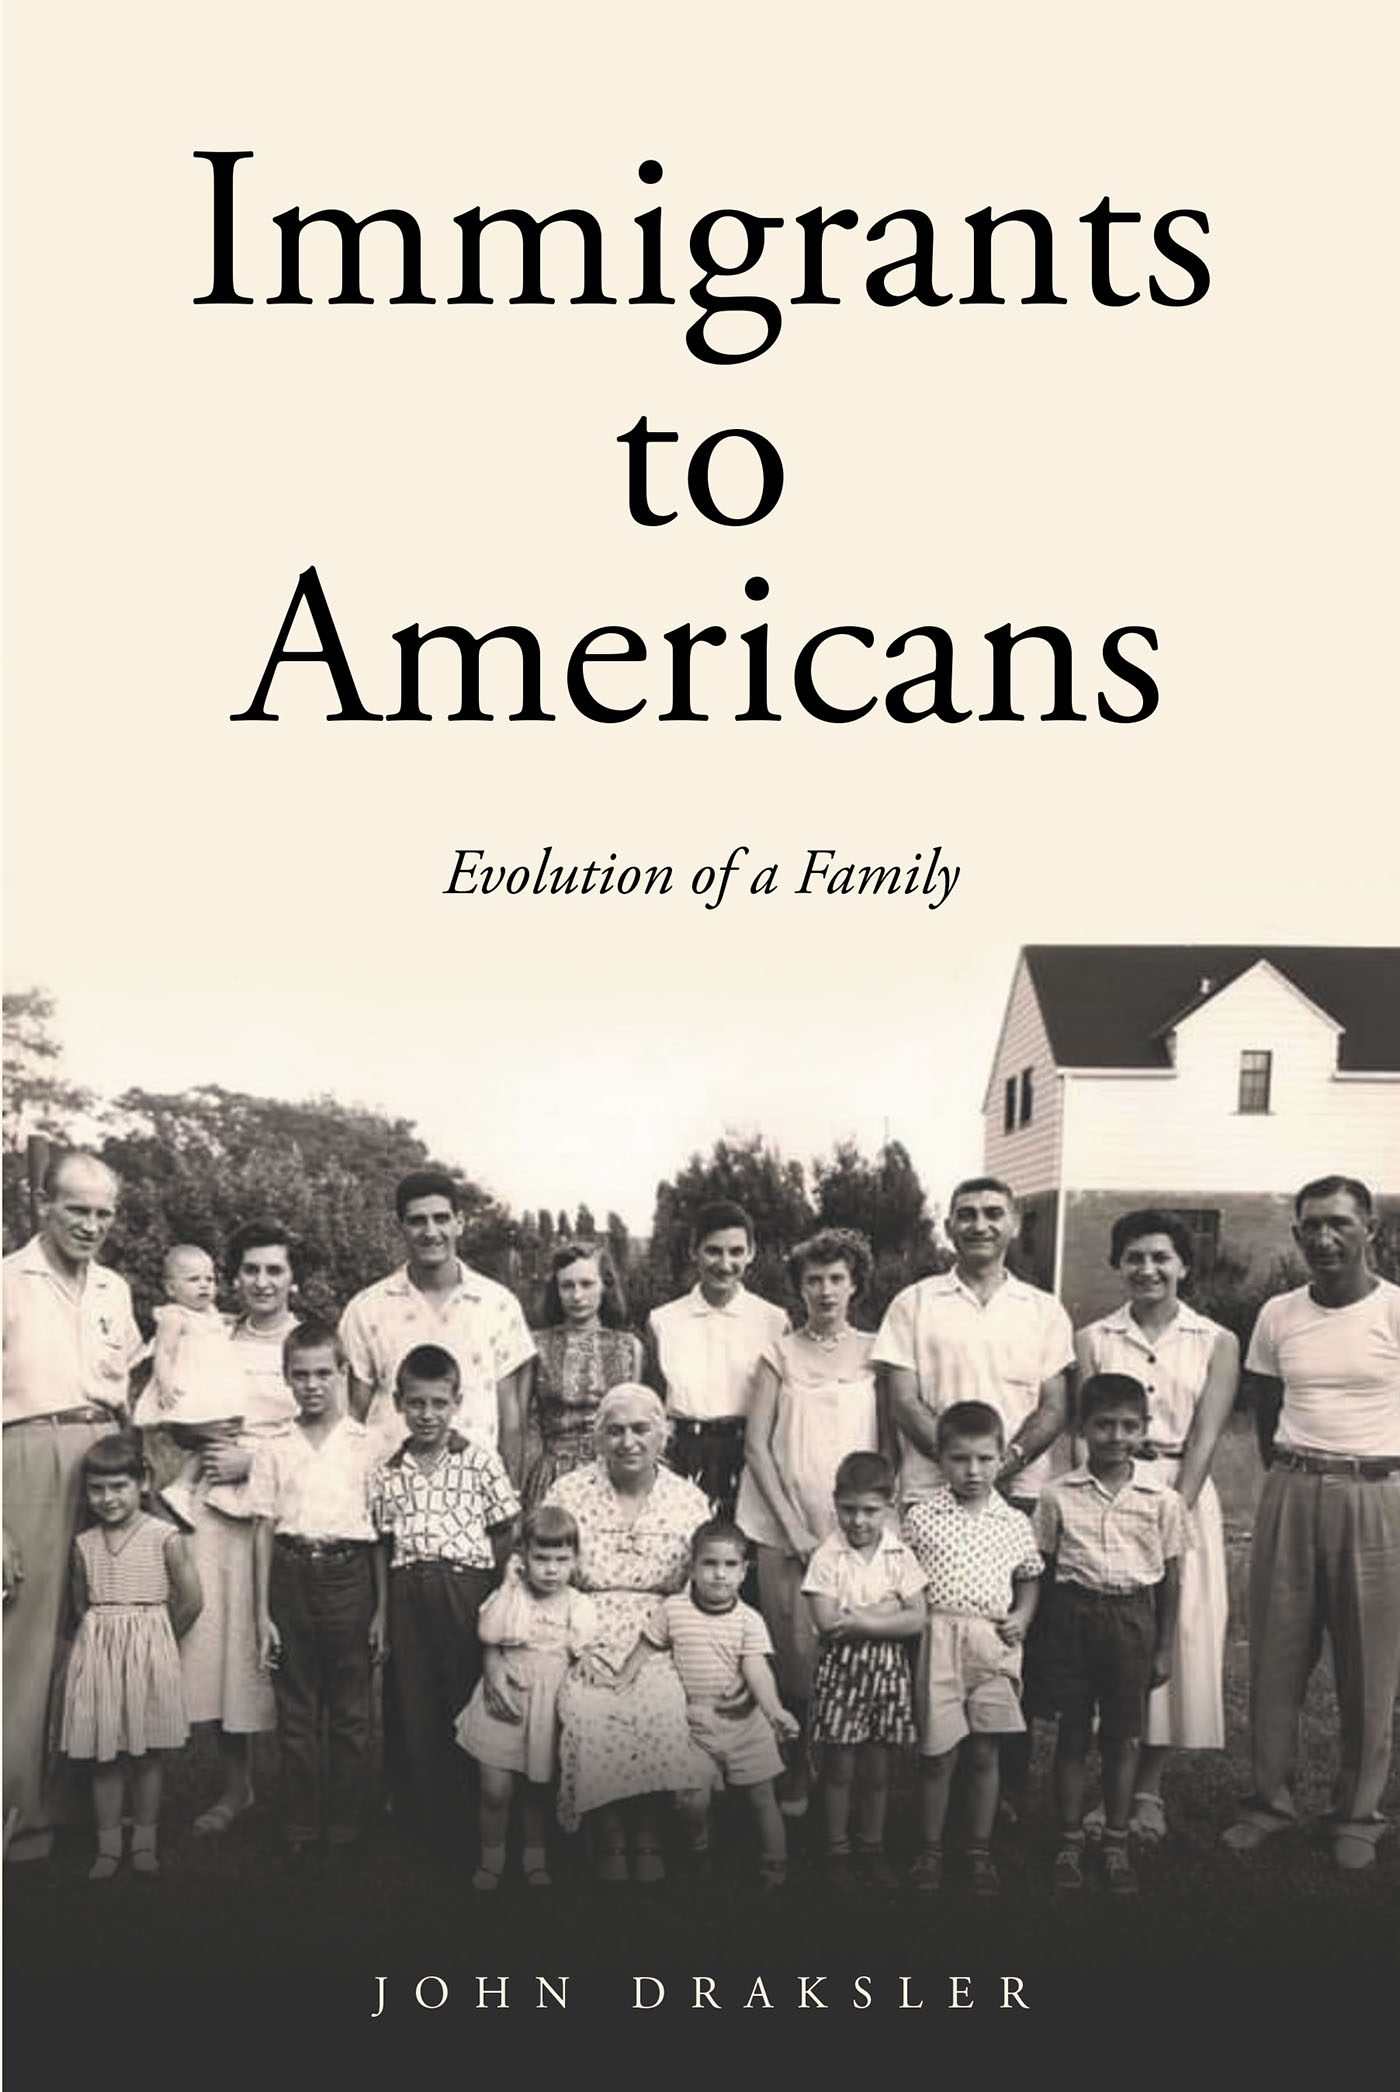 Author John Draksler’s New Book, "Immigrants to Americans: Evolution of a Family," is an Engaging Narrative That Shares the Story of the Author’s Family